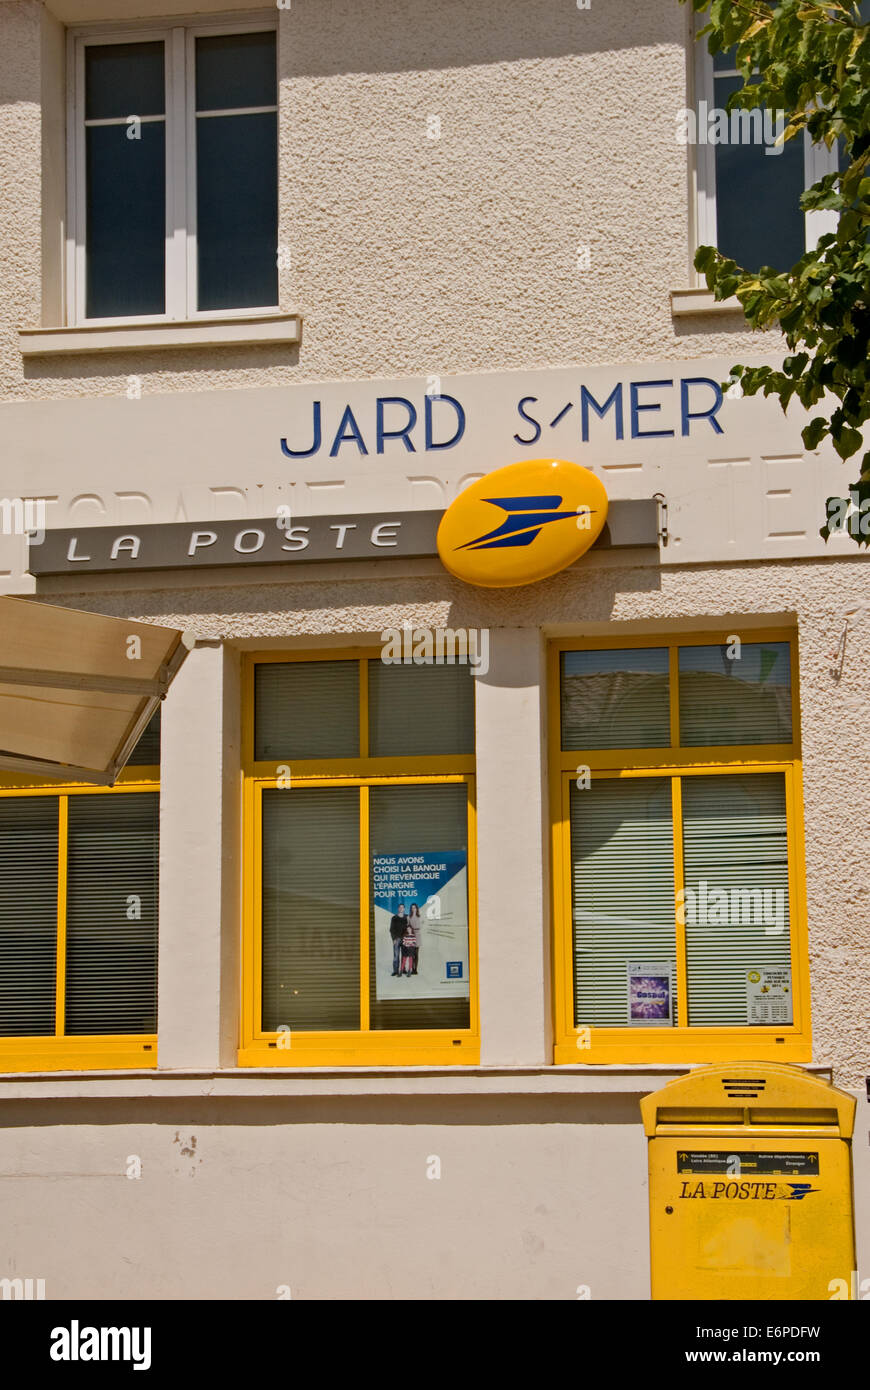 3 Things About The French Postal System: La Poste